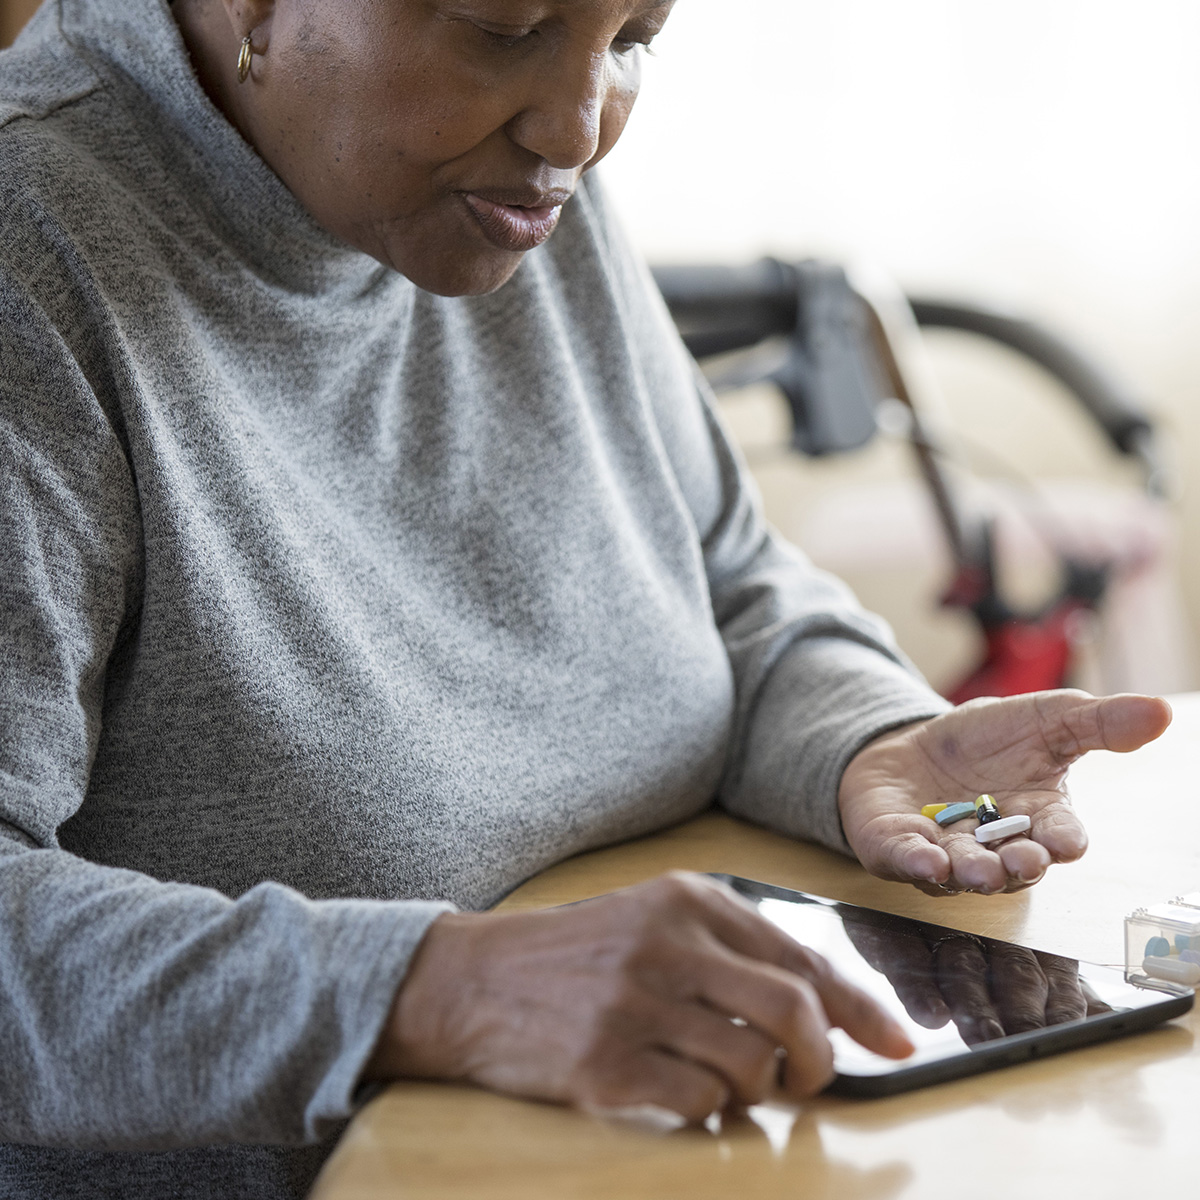 Woman looks up information on her tablet at the kitchen table while holding medication in the other hand.